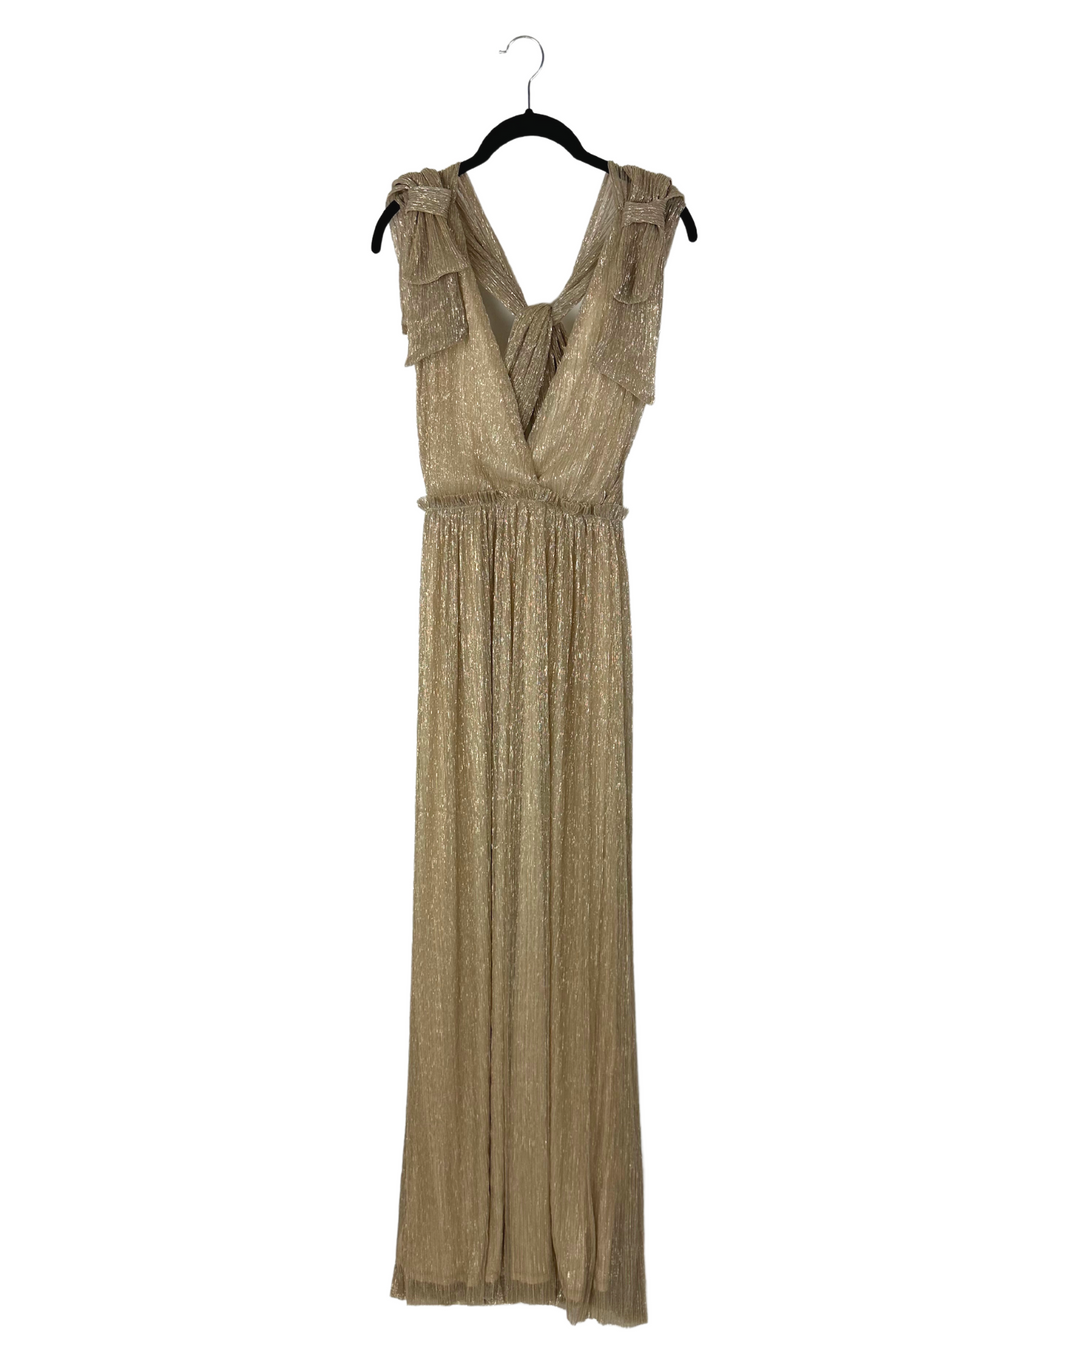 Gold Metallic Tie Shoulder Maxi Dress - Size 0/2 and 2/4